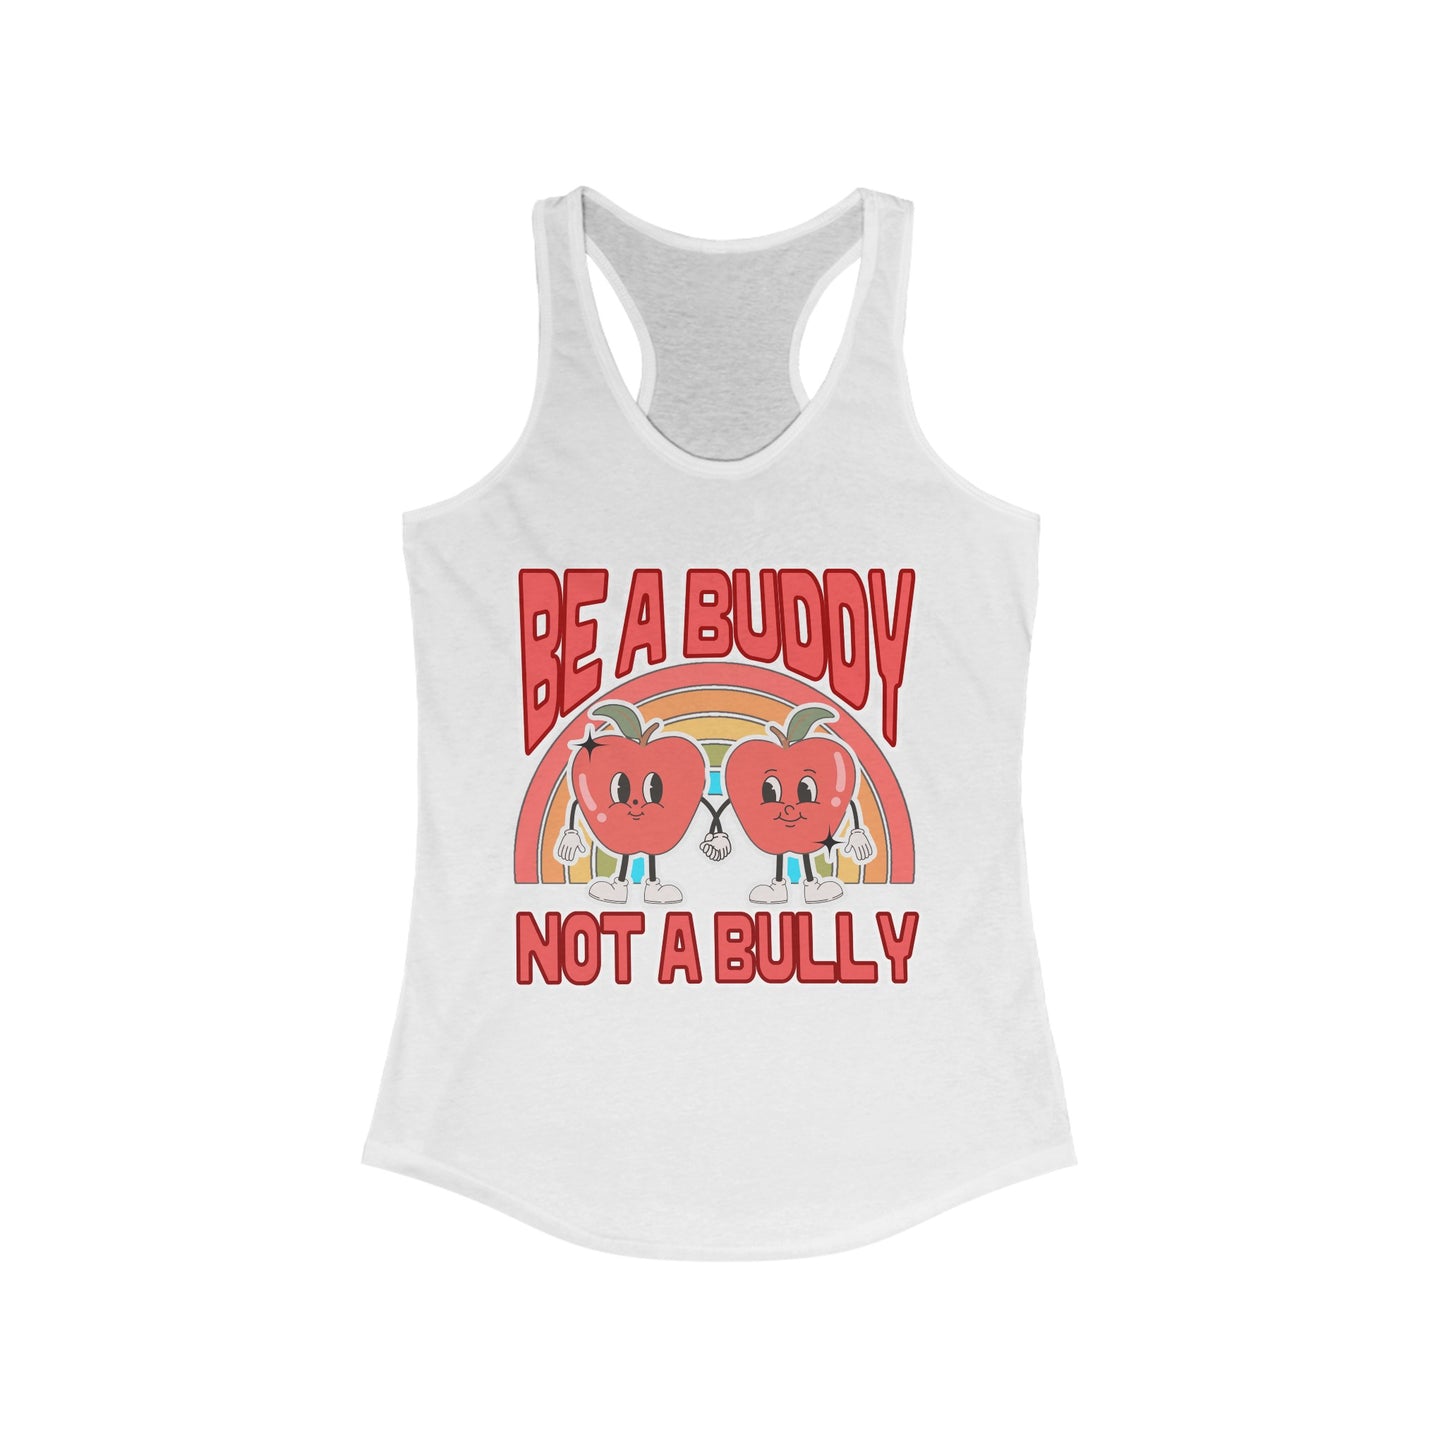 Don't Be a Bully - Women's Ideal Racerback Tank